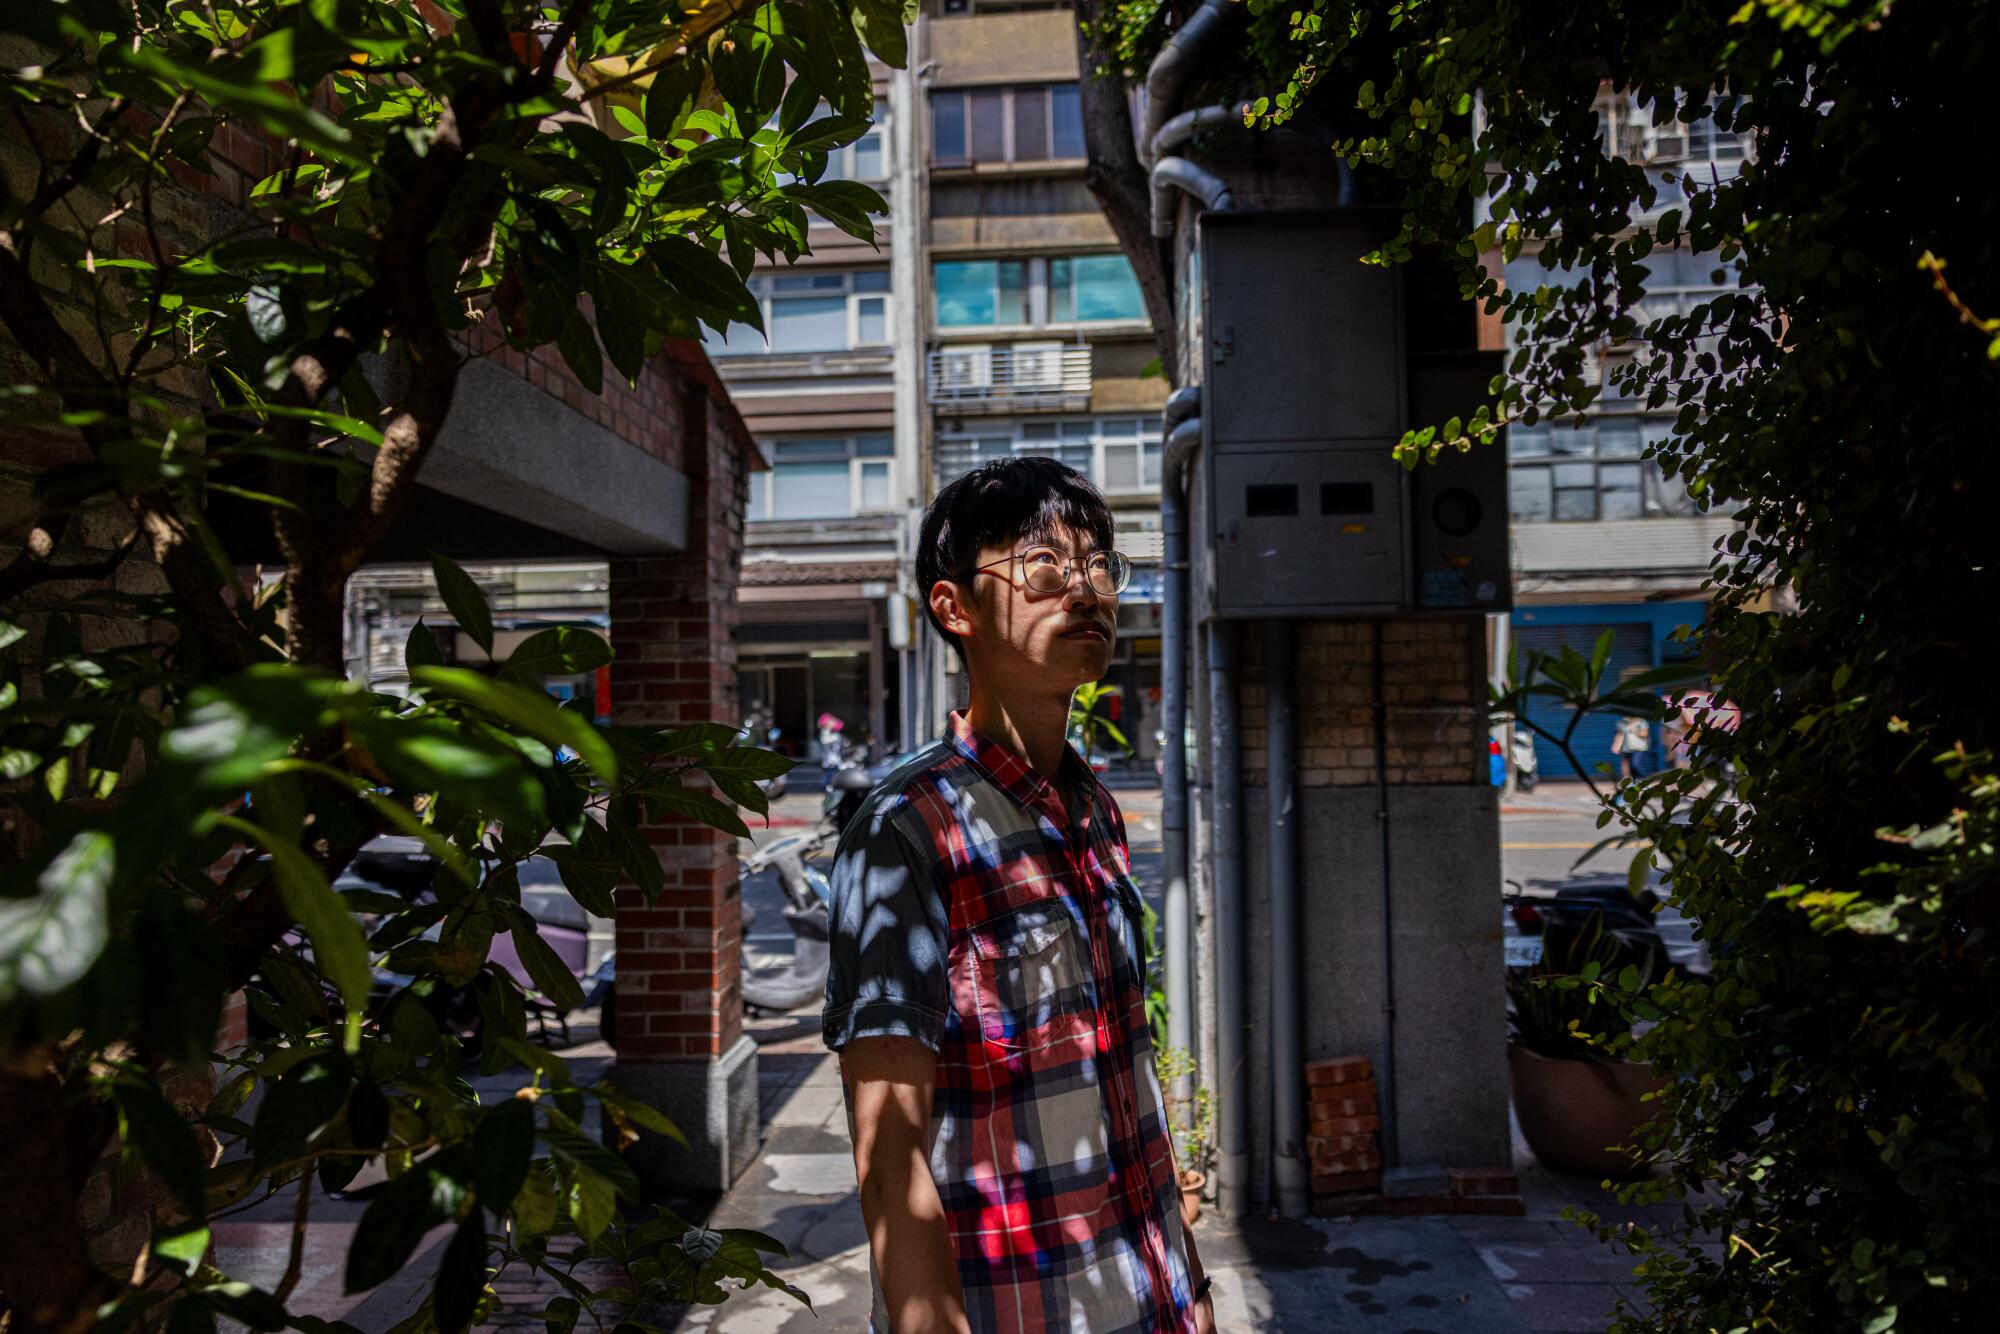 Lee Yuan-chun, who has accused famed Chinese dissident Wang Dan of attempted sexual assault 